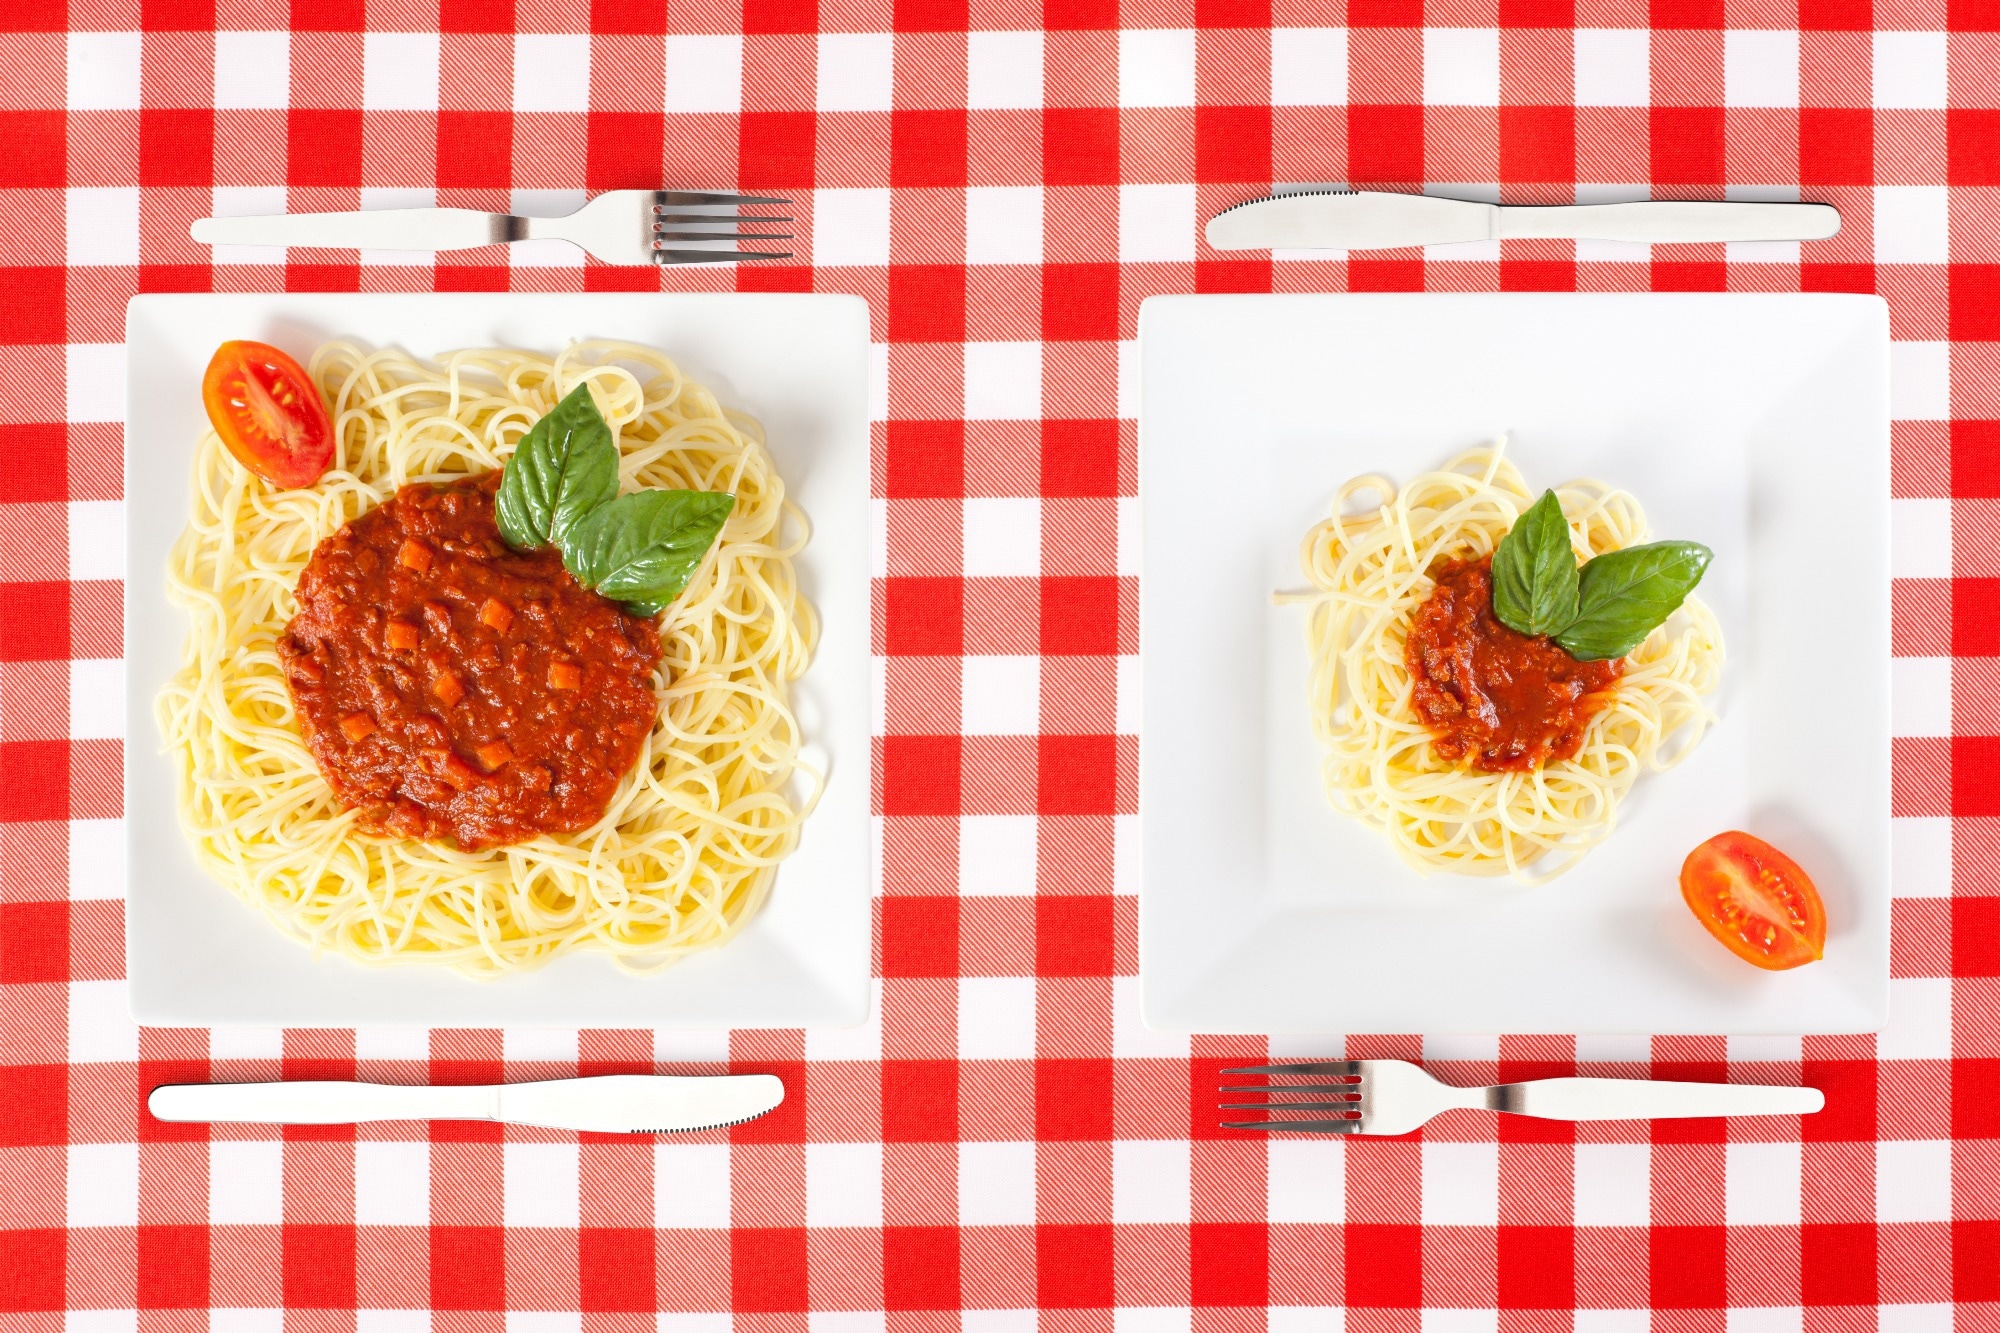 Study: Role of Portion Size in the Context of a Healthy and Balanced Diet: A Case Study of European Countries.  Image Credit: Joseph Ludwig Stephens / Shutterstock